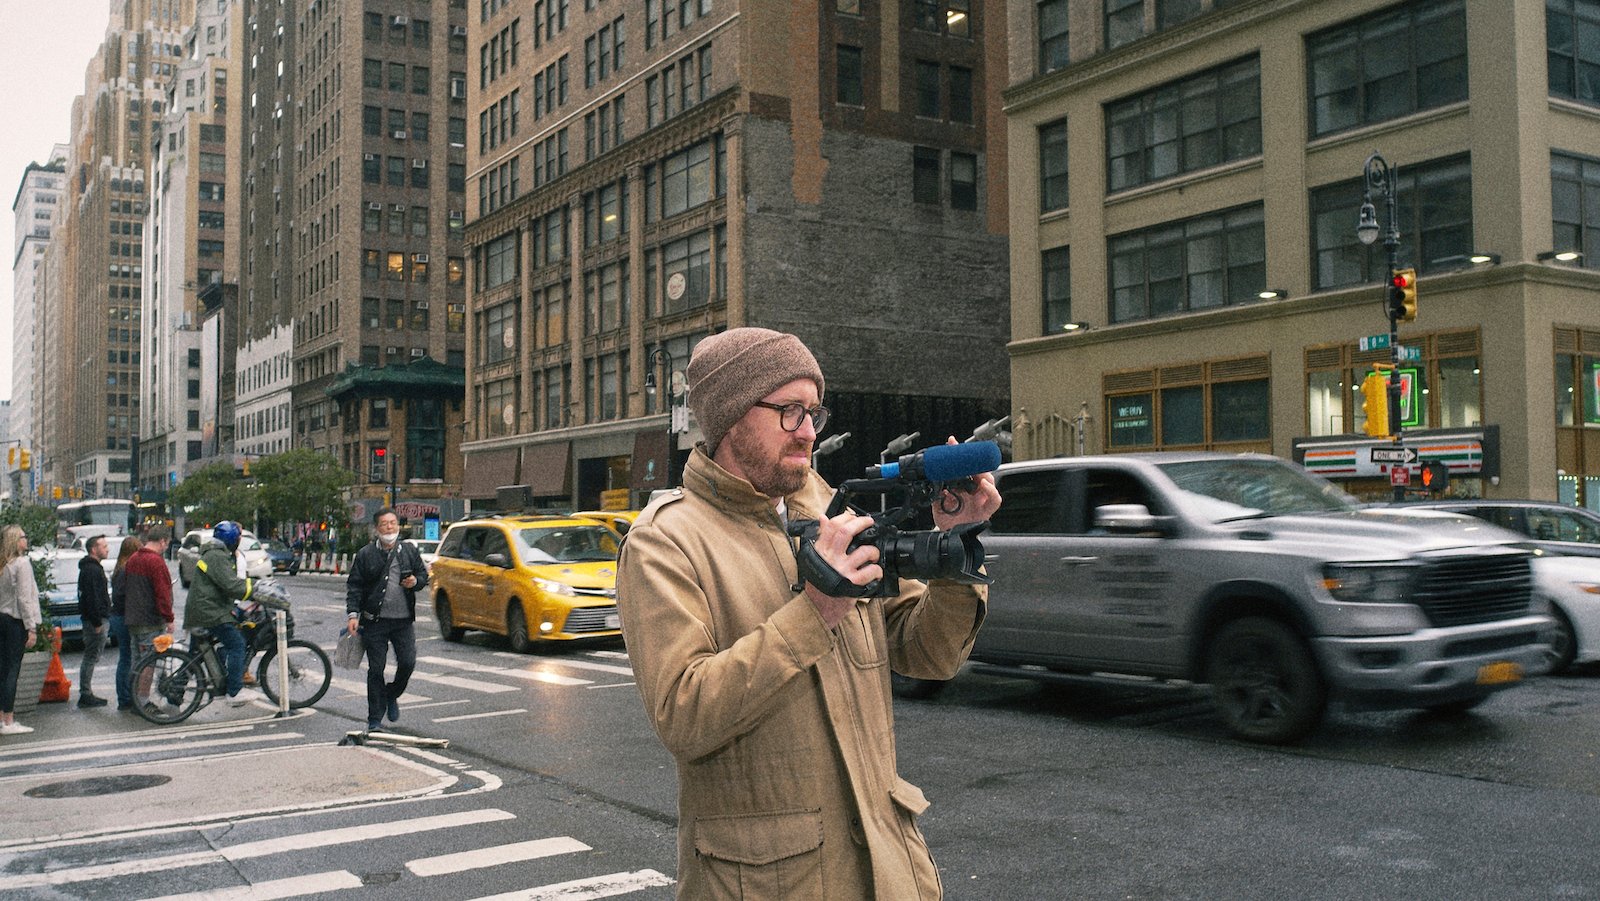 A man in glasses holds a video camera as he stands on a New York City street